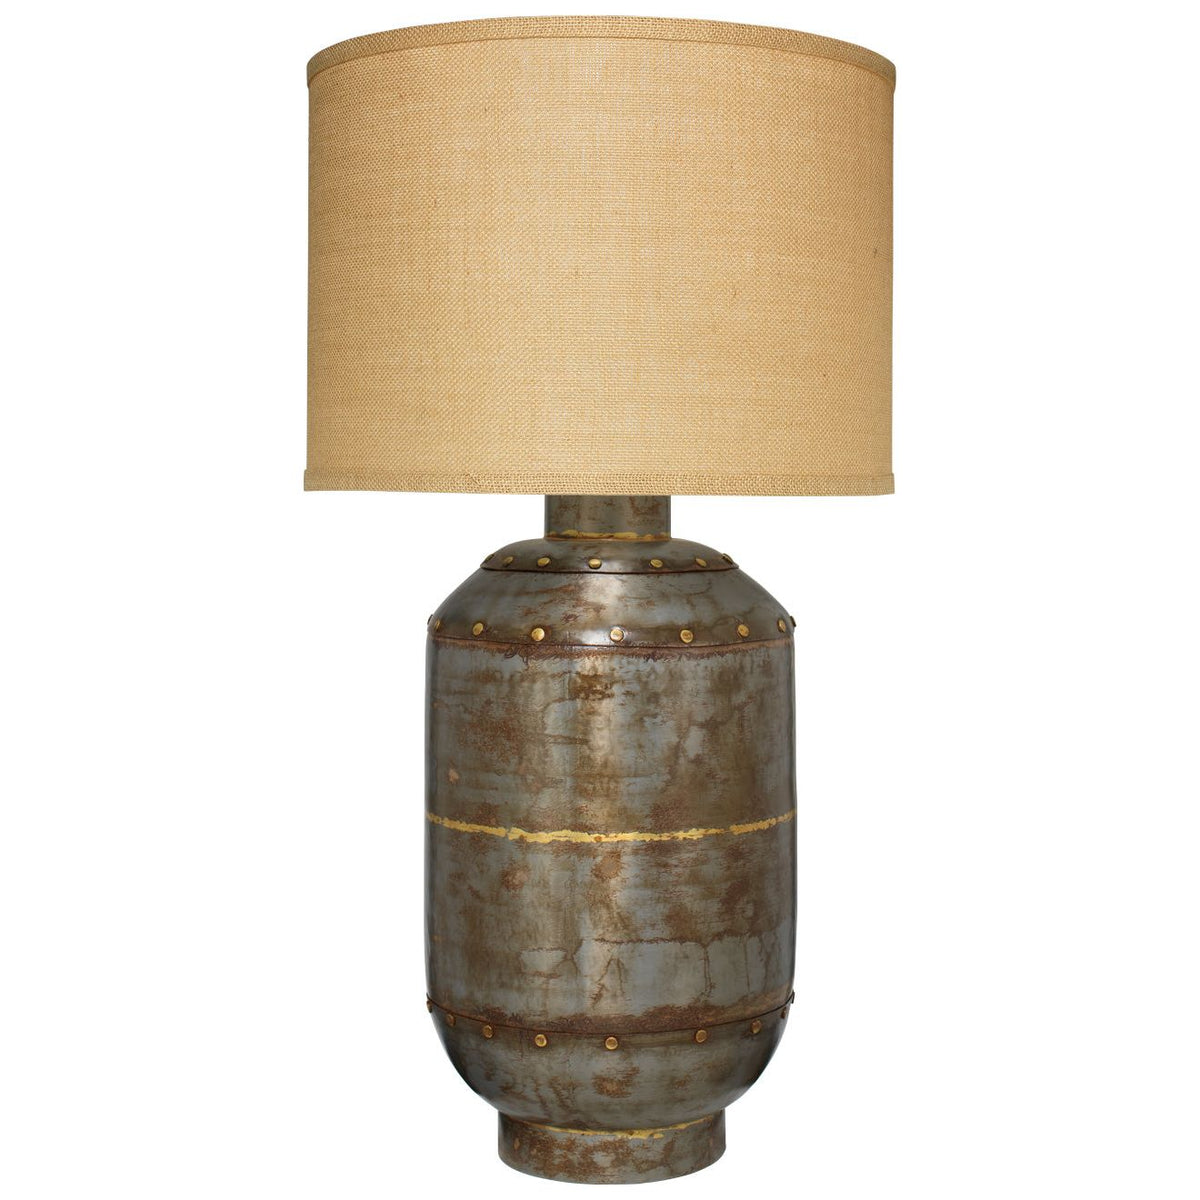 Jamie Young Company - 1CAIS-XLGM - Caisson Table Lamp - Caisson - Grey